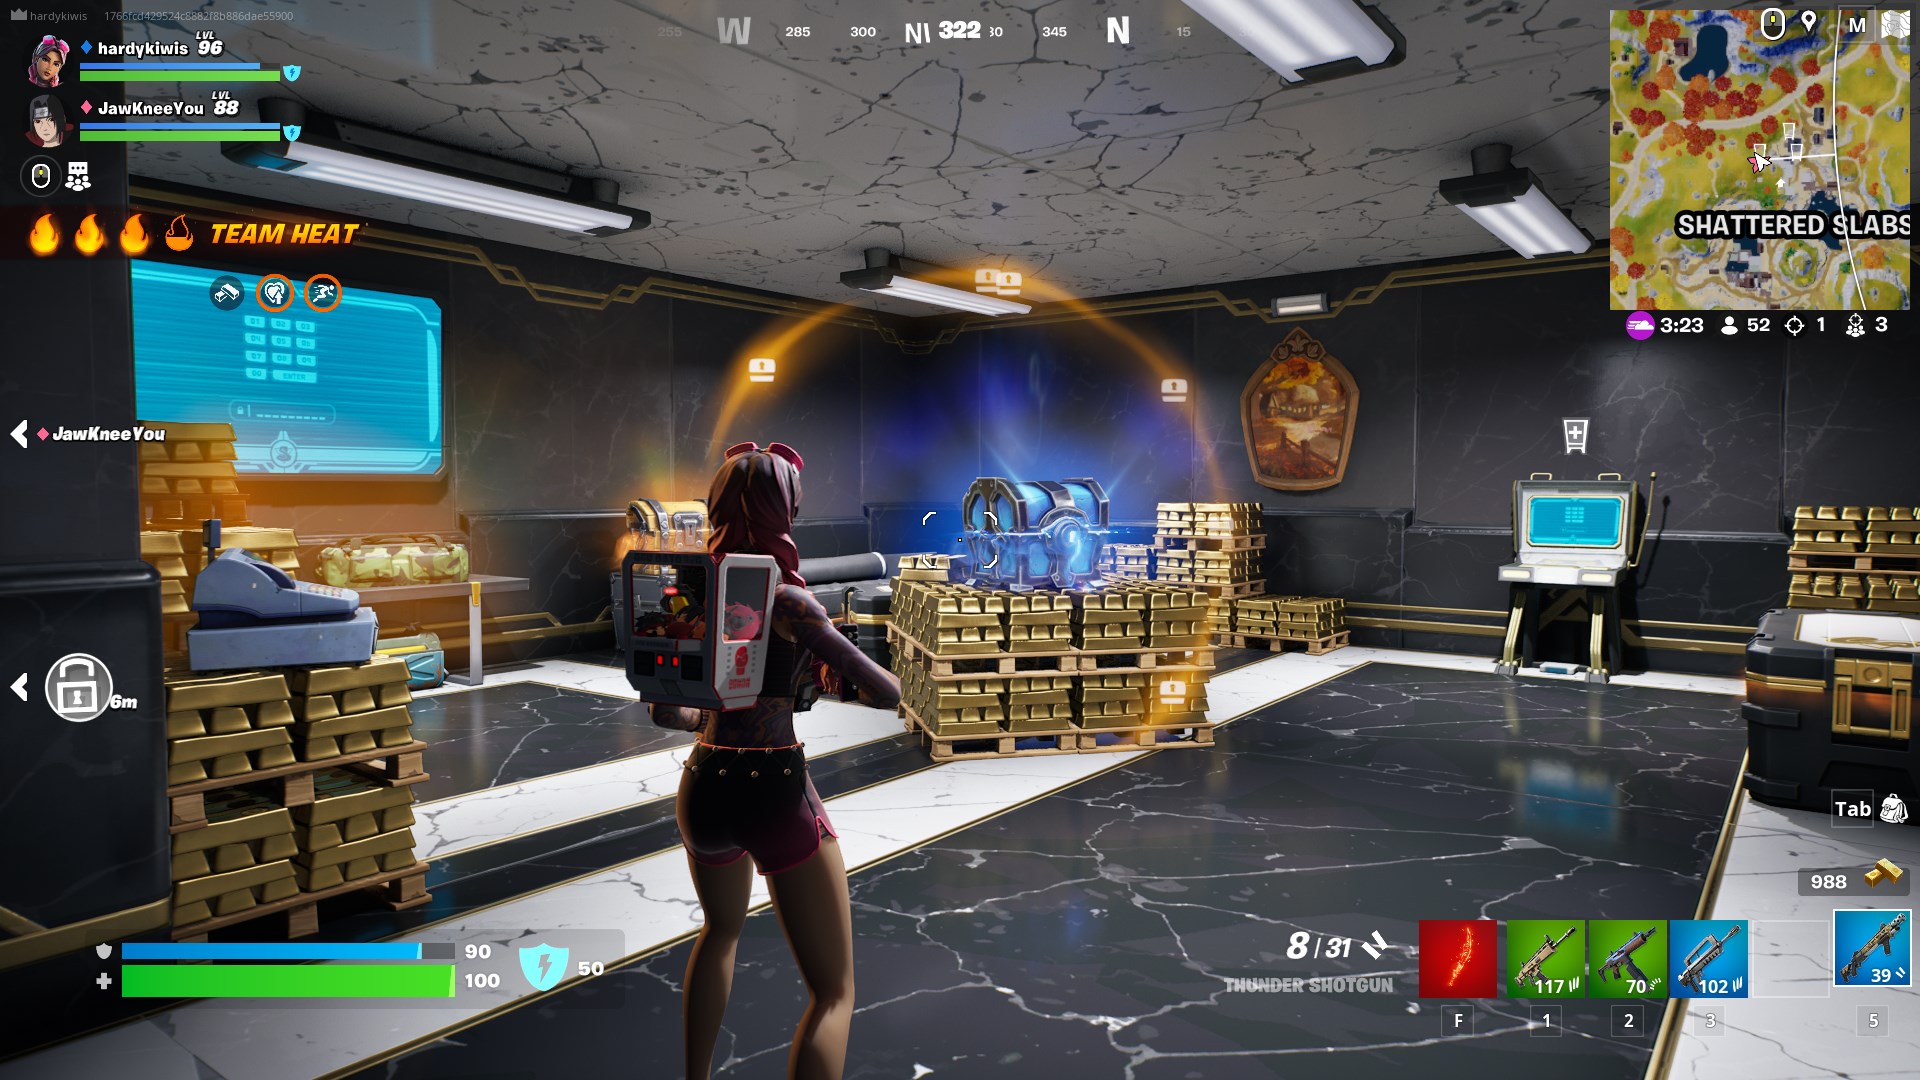 A Fortnite character stands in a vault filled with gold and other loot